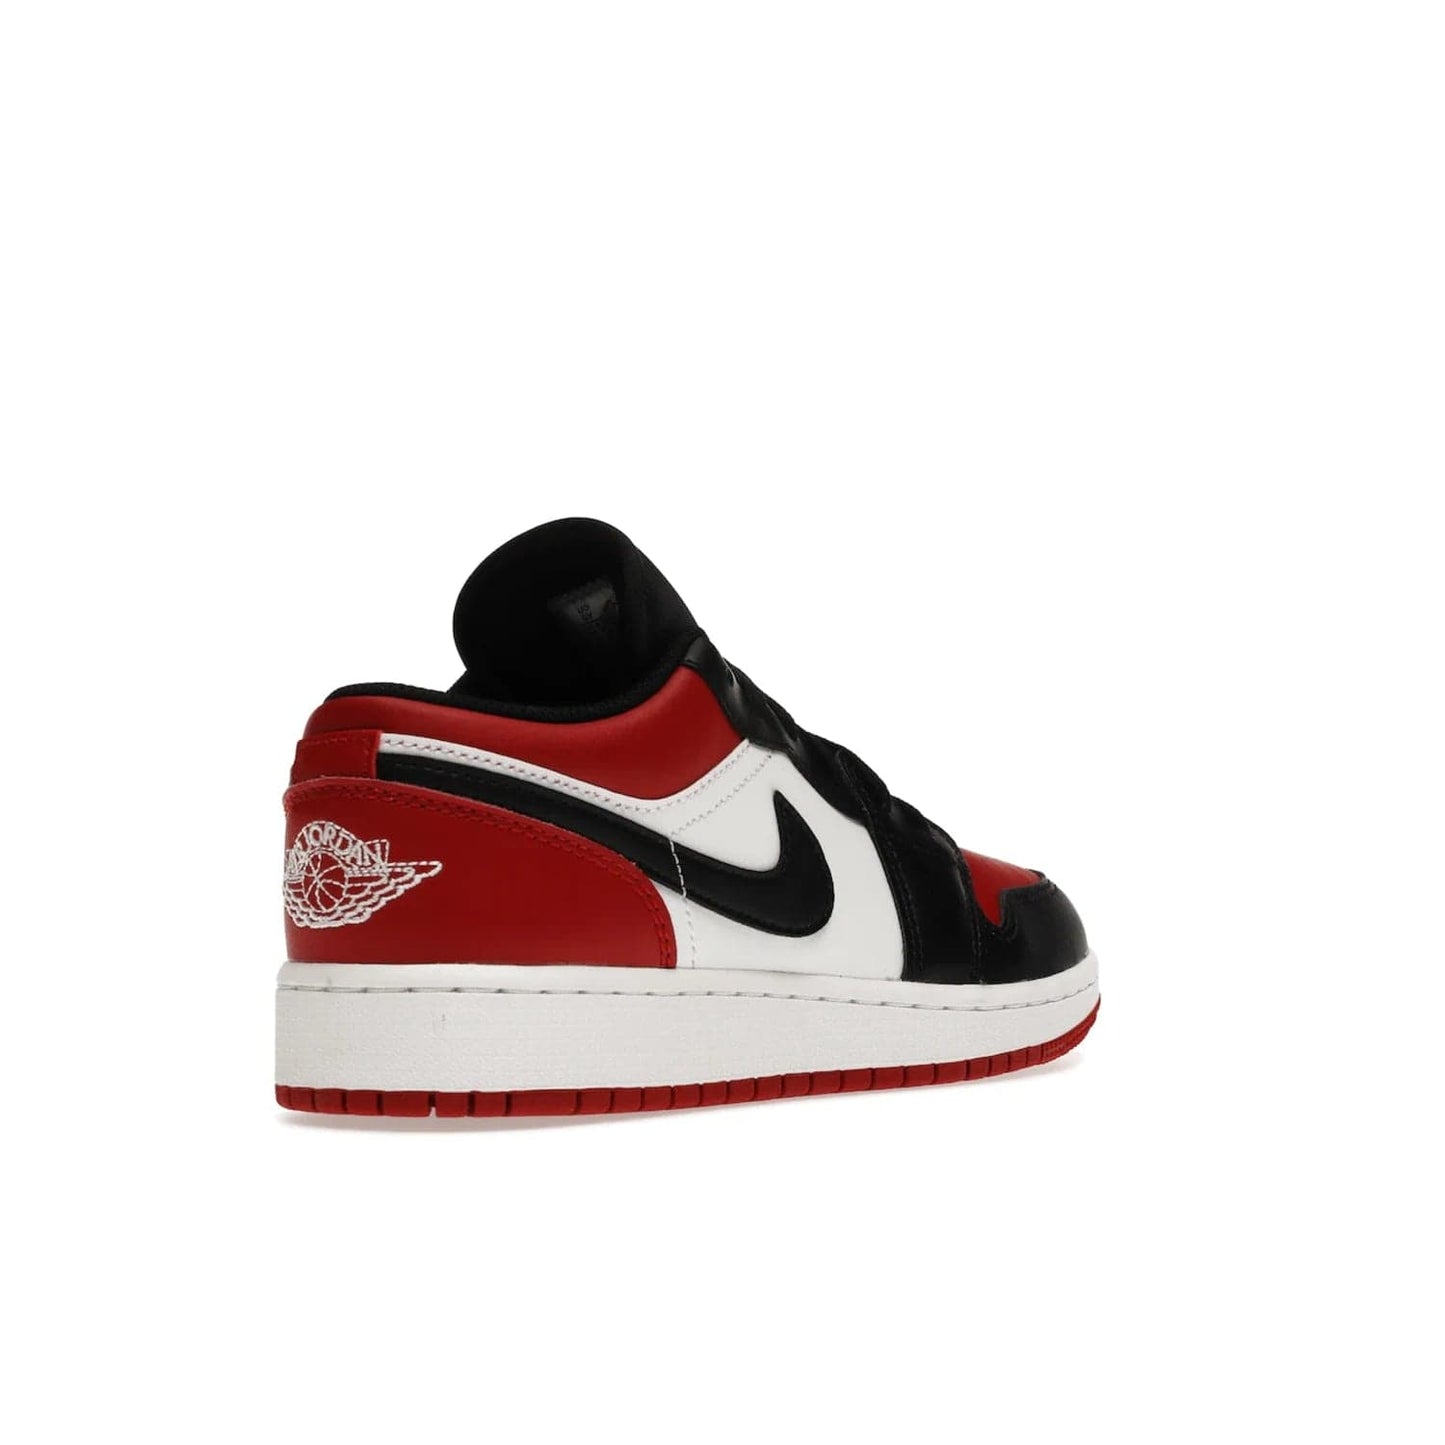 Jordan 1 Low Bred Toe (GS) - Image 32 - Only at www.BallersClubKickz.com - #
Iconic sneaker from Jordan brand with classic colorway, unique detailing & Air Jordan Wings logo. Step into the shoes of the greats with the Jordan 1 Low Bred Toe GS!